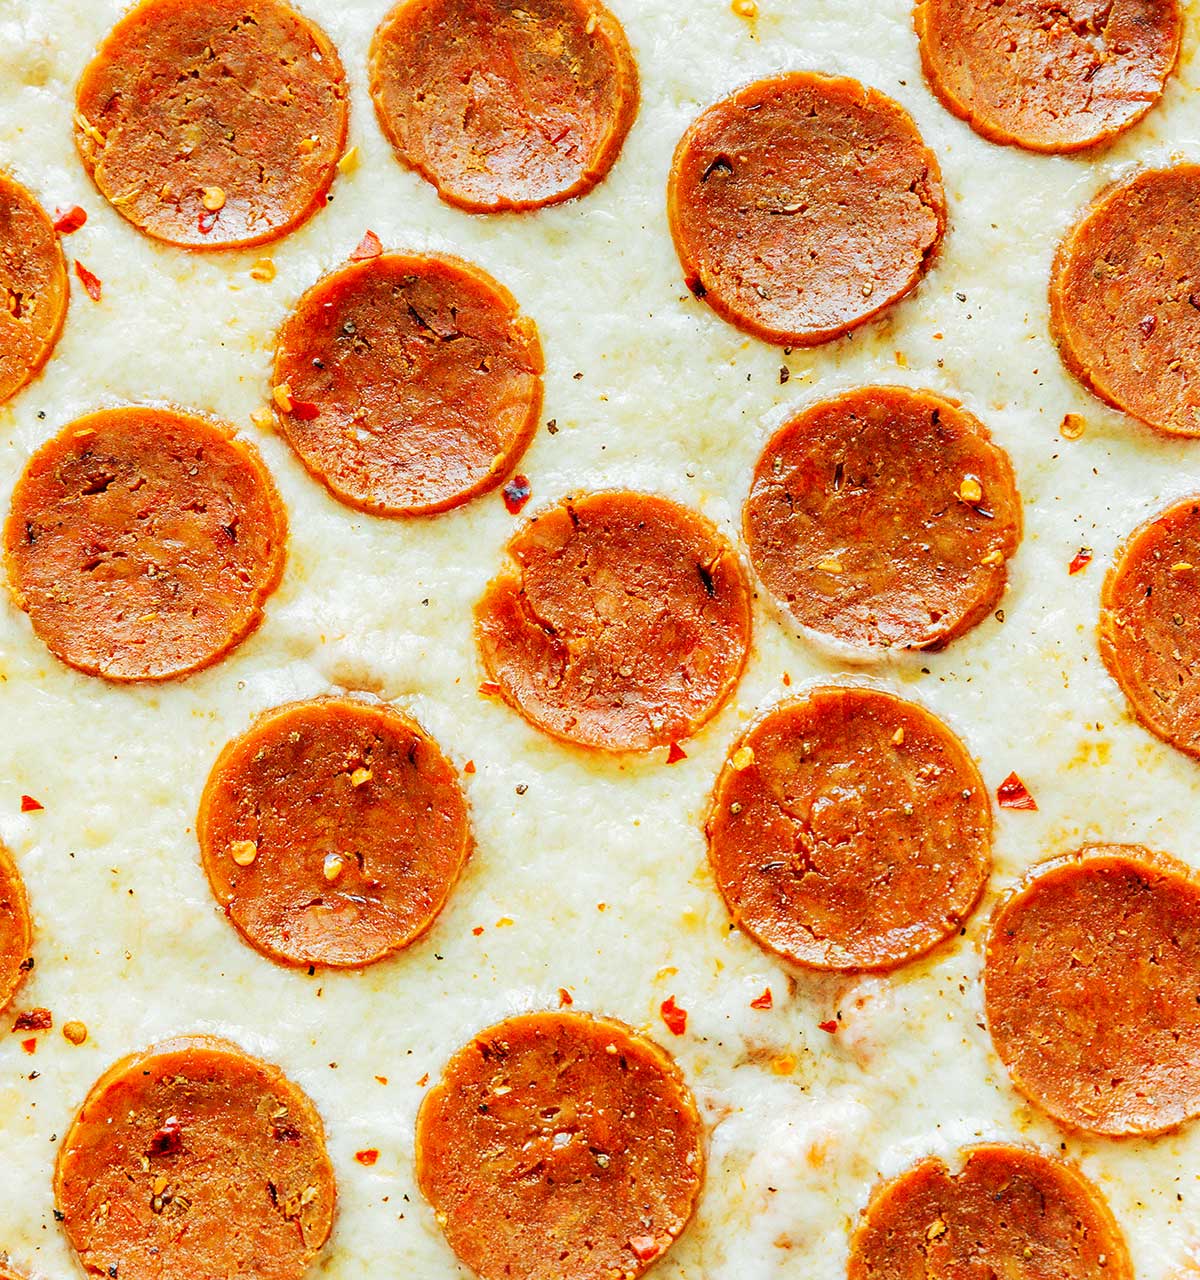 An up-close view of homemade pizza featuring cheese and vegetarian pepperoni